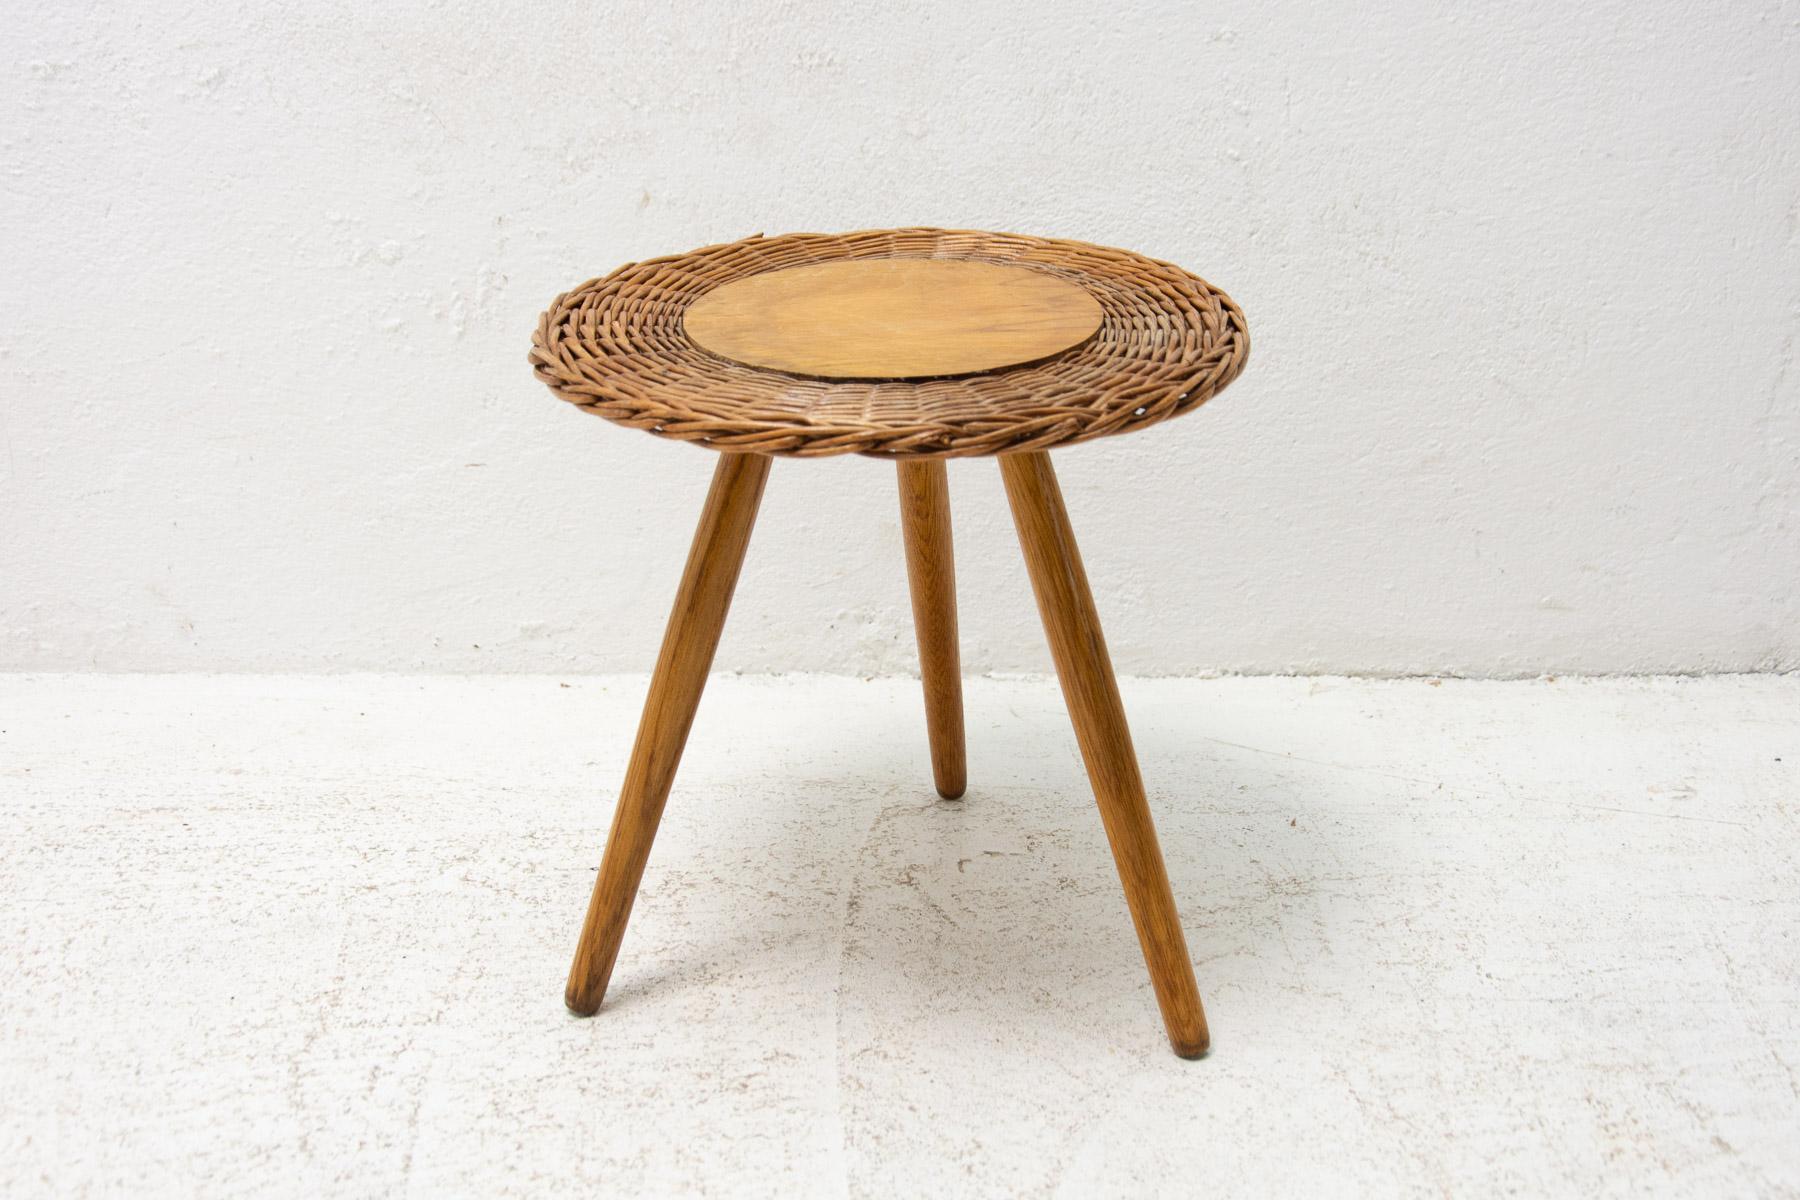 Czechoslovak rattan stool designed by Jan Kalous for ÚLUV in the 1960´s. Very simple and elegant design. In good Vintage condition, showing signs of age and using.

Measures: Height: 31 cm

width: 30 cm

depth: 30 cm.